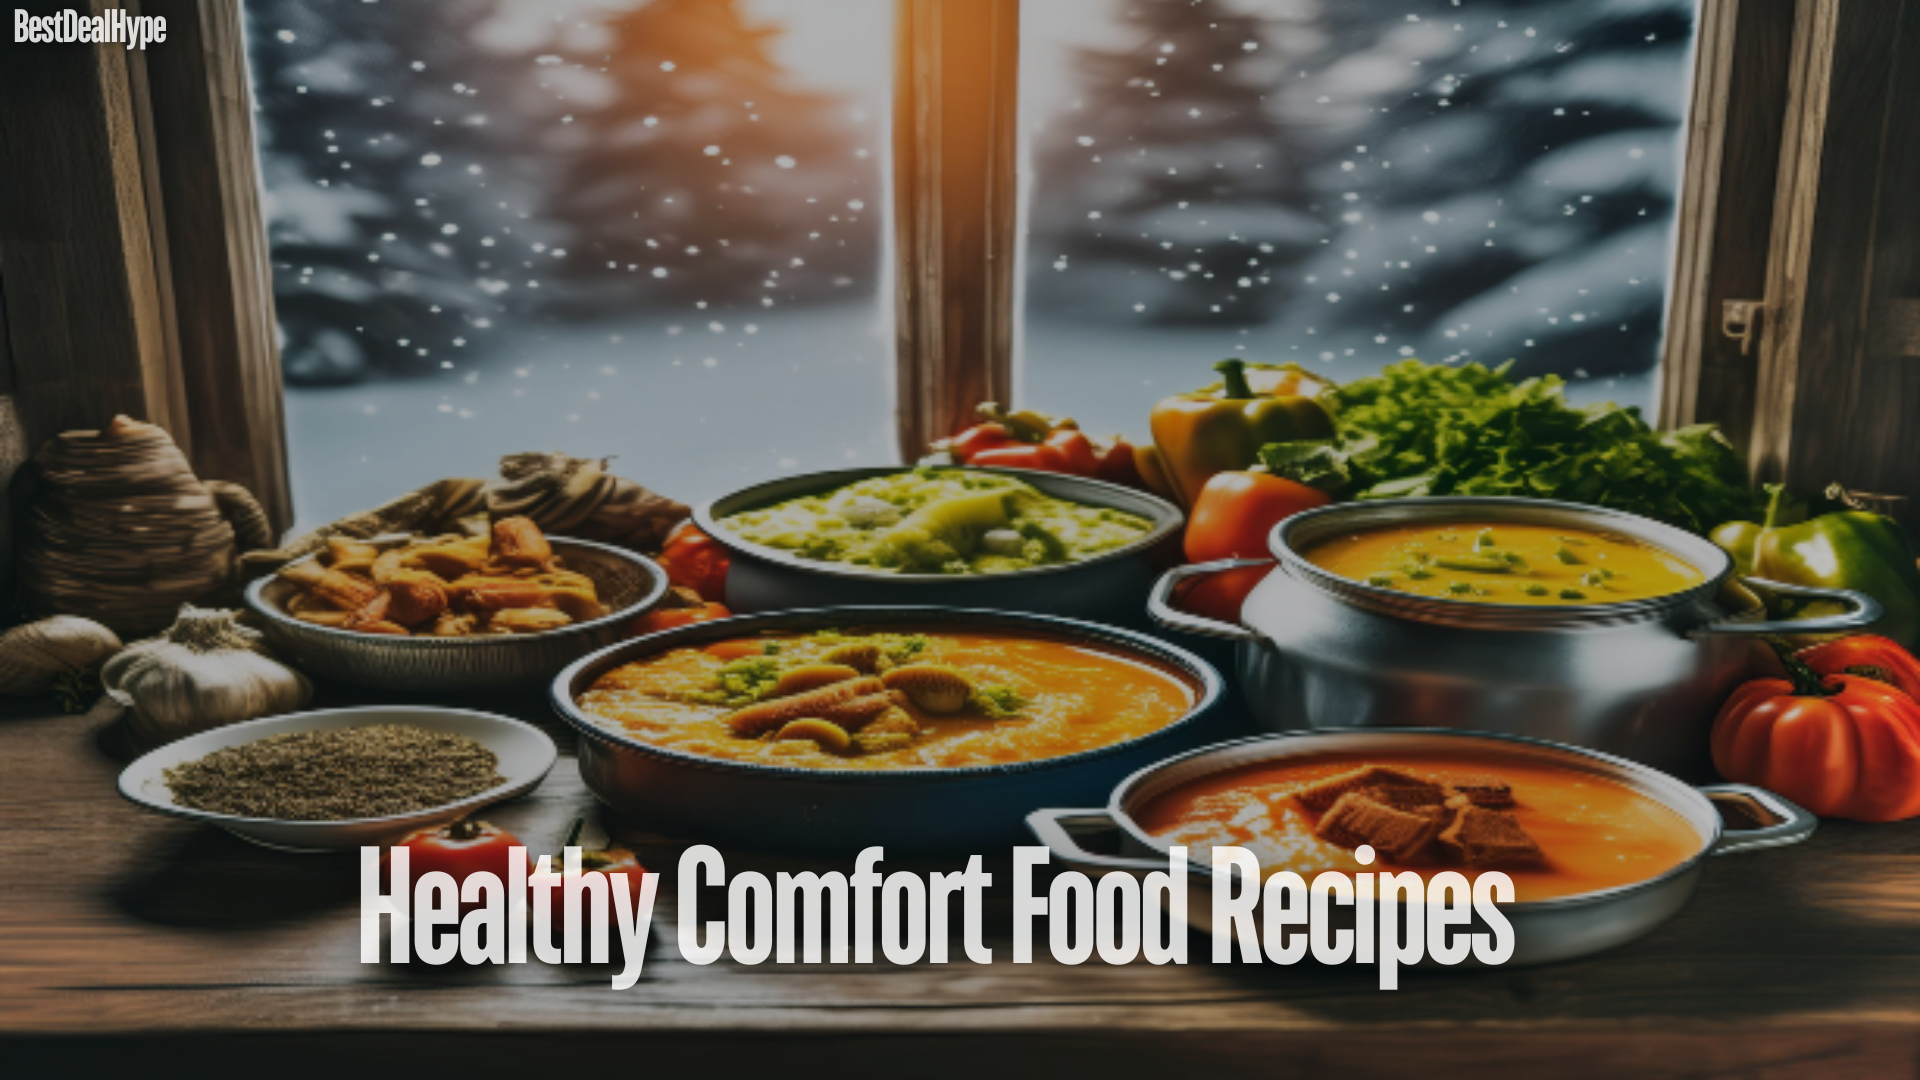 Warm up with healthy comfort food recipes for winter 2024. Enjoy quinoa-stuffed peppers, turmeric chicken soup, and butternut squash mac and cheese.